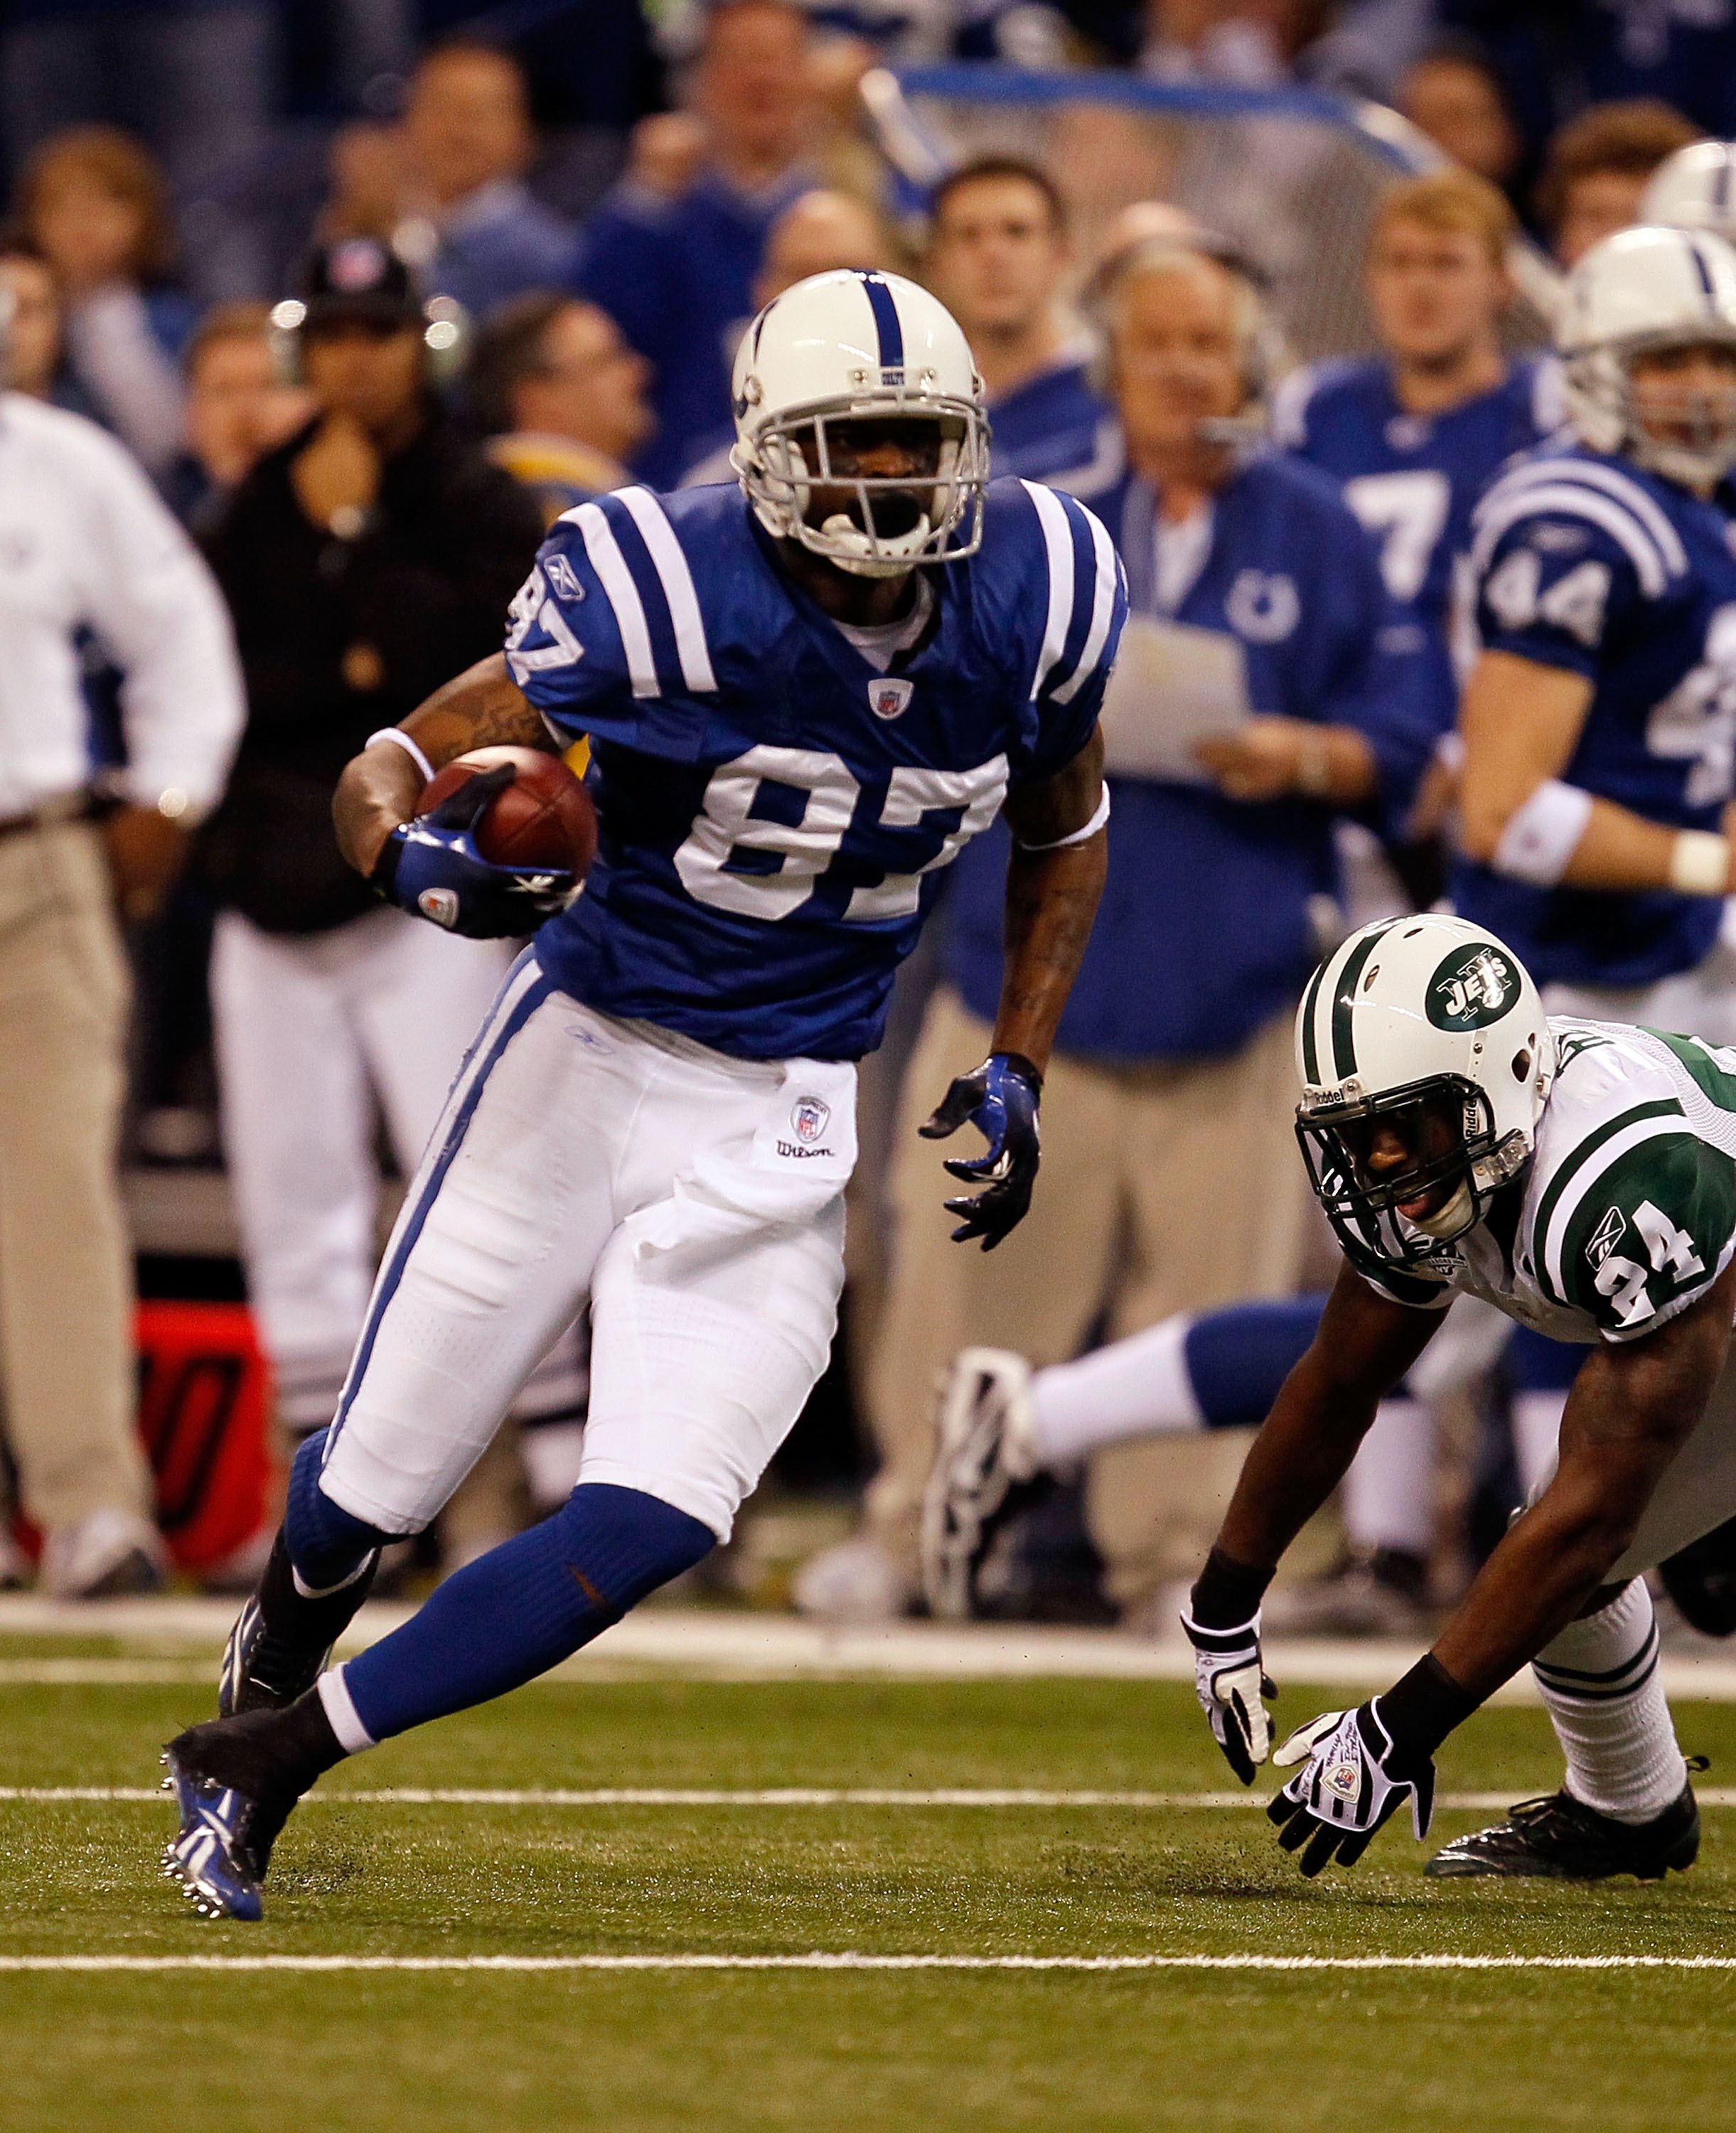 INDIANAPOLIS - JANUARY 24:  Wide receiver Reggie Wayne #87 of the Indianapolis Colts runs the ball while playing against the New York Jets during the AFC Championship Game at Lucas Oil Stadium on January 24, 2010 in Indianapolis, Indiana. The Colts defeat